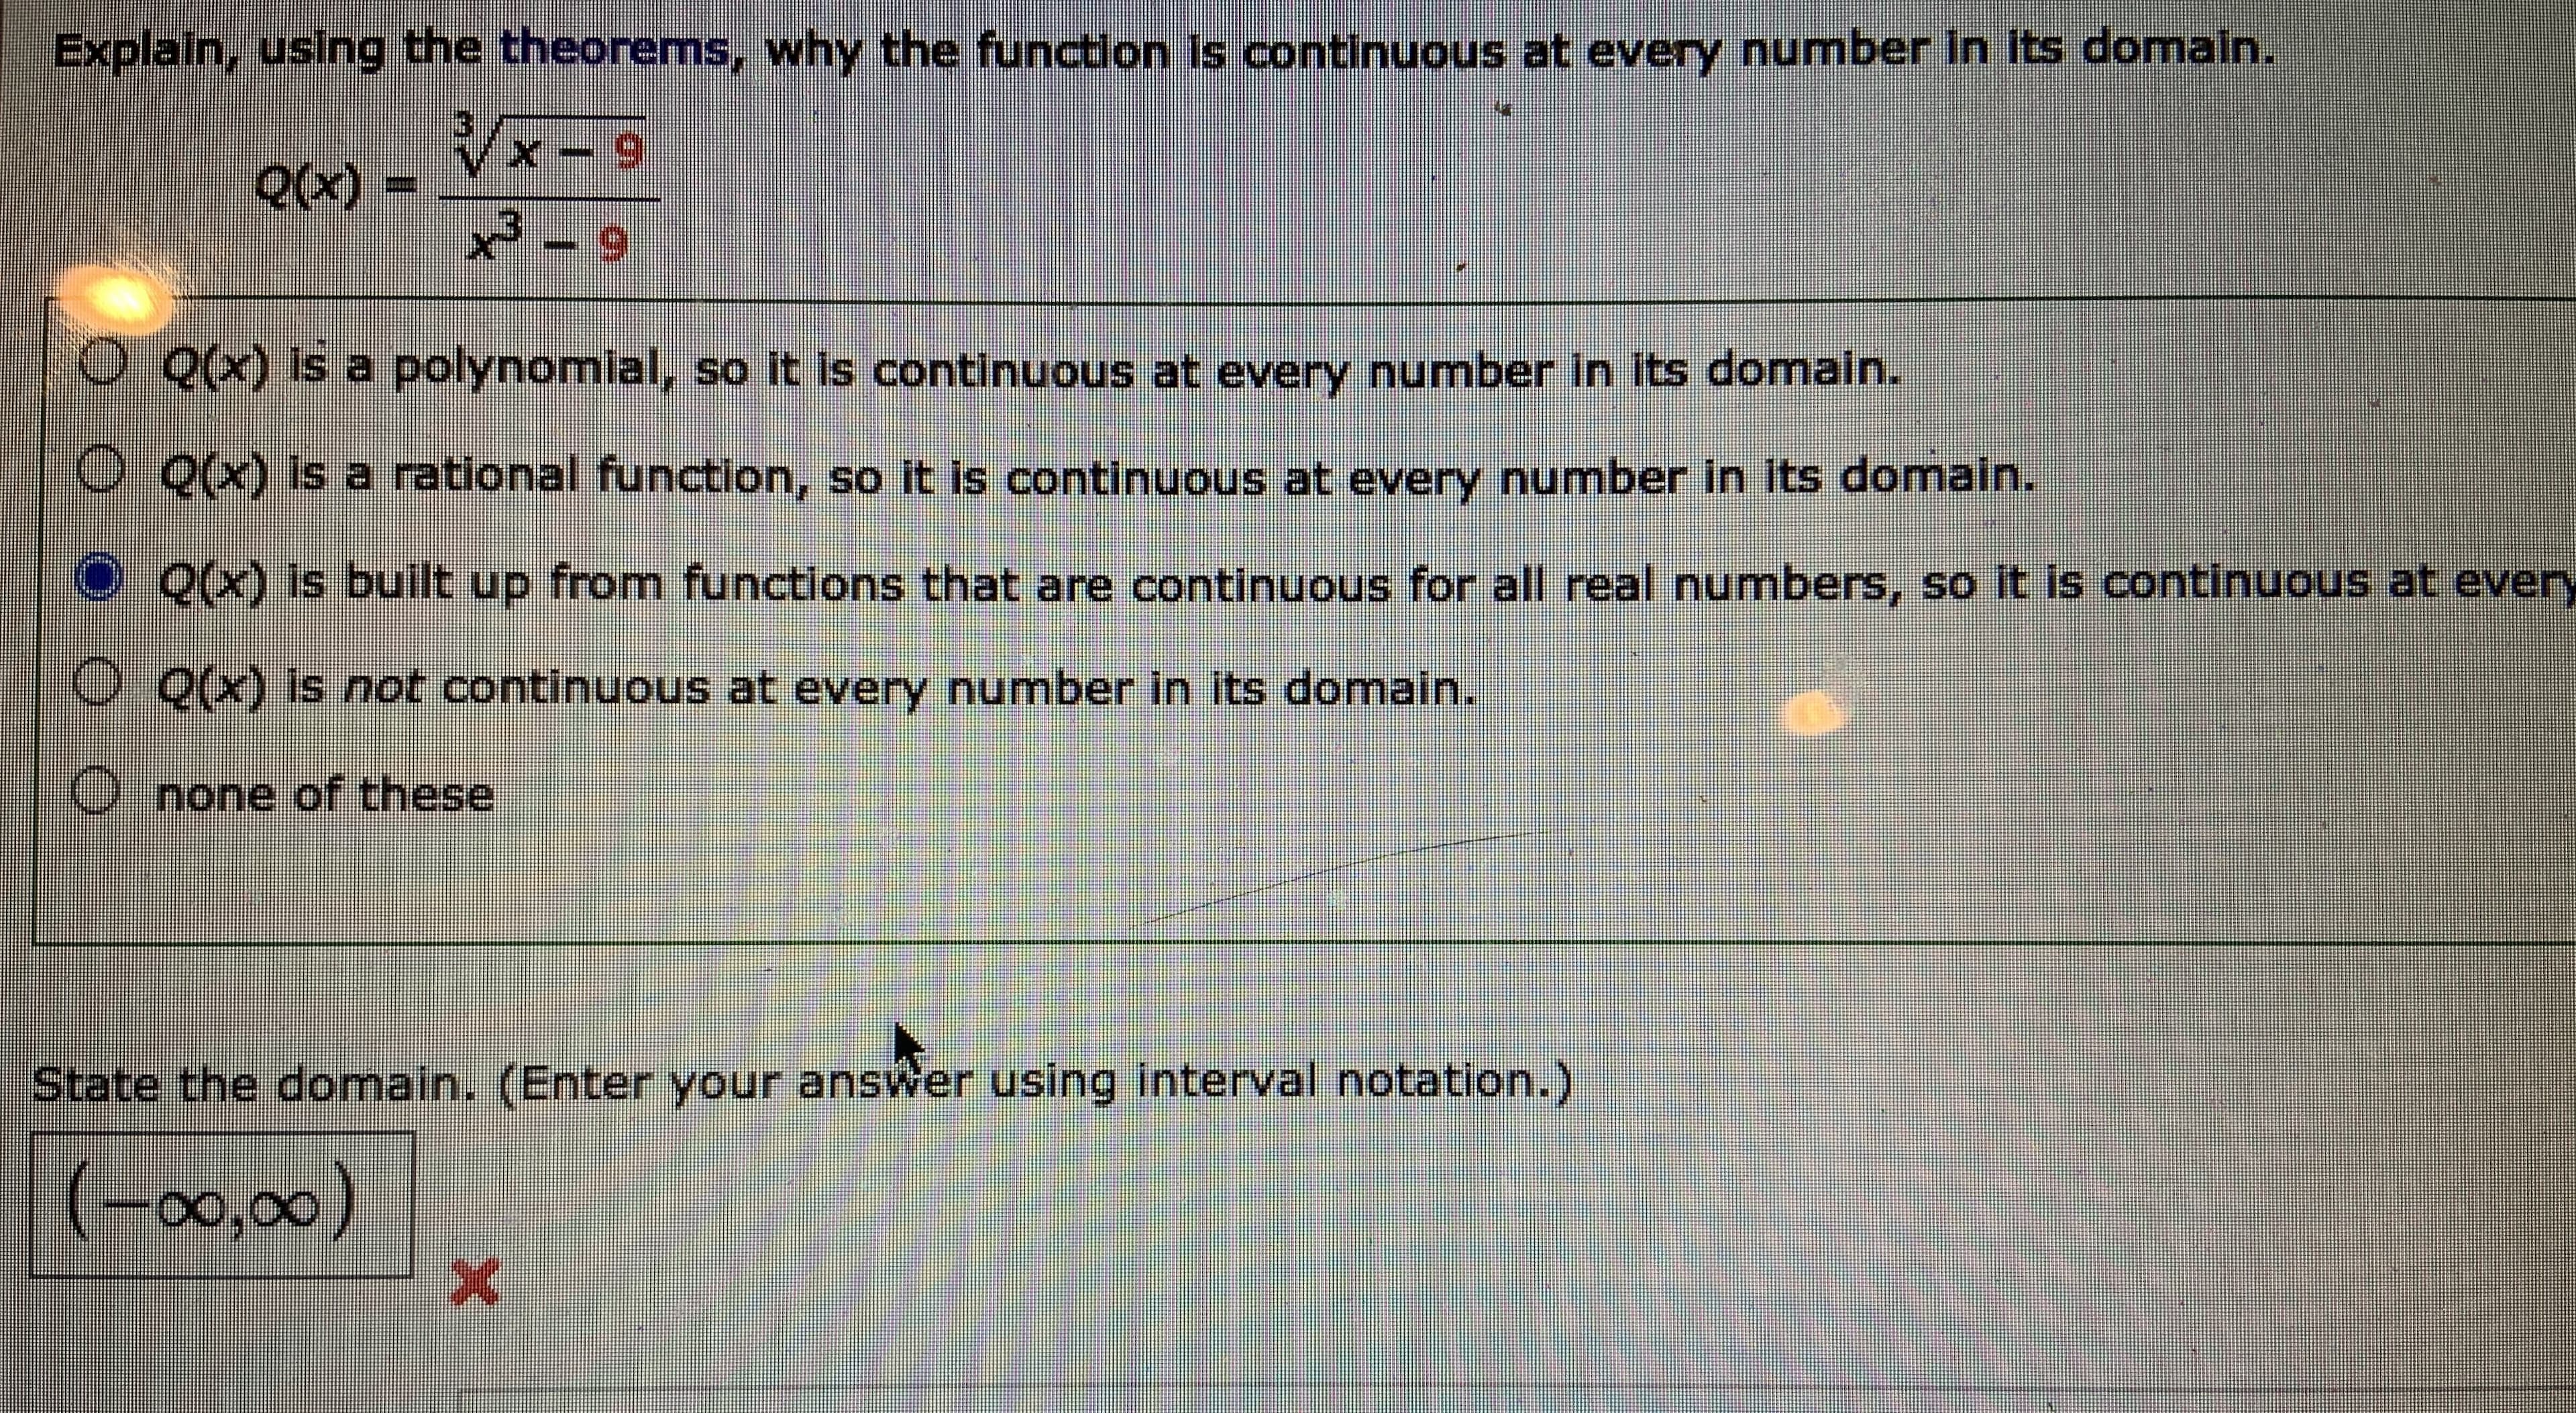 Explain, using the theorems, why the function Is continuous at every number In Its domaln.
x- 9
Q(x) =
